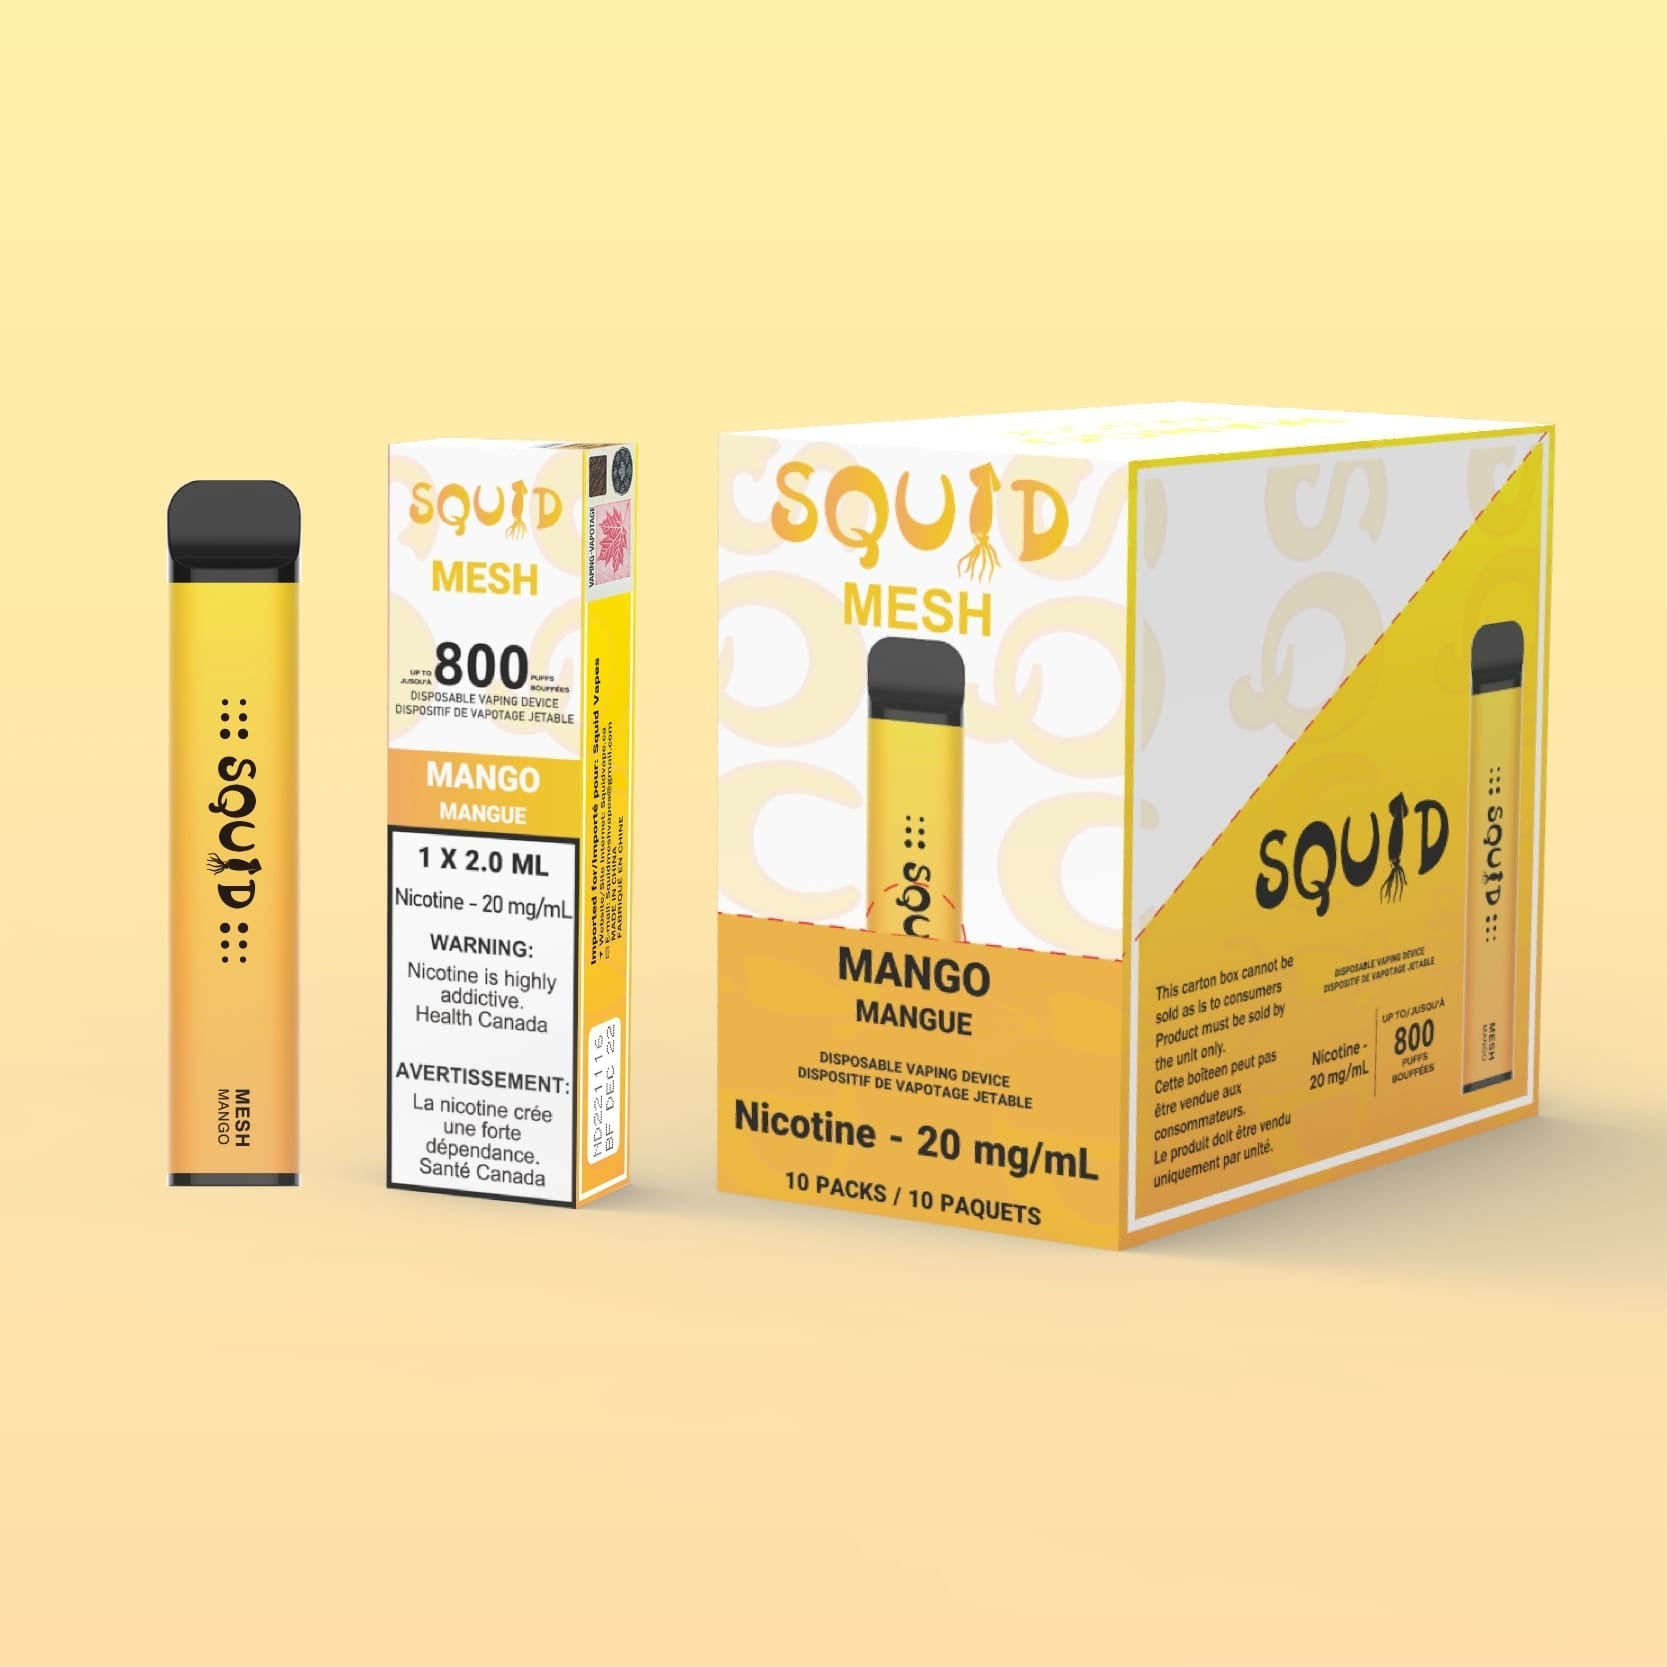 [Disposables] Squid - Mango Disposable Pod Systems Vancouver Toronto Calgary Richmond Montreal Kingsway Winnipeg Quebec Coquitlam Canada Canadian Vapes Shop Free Shipping E-Juice Mods Nic Salt